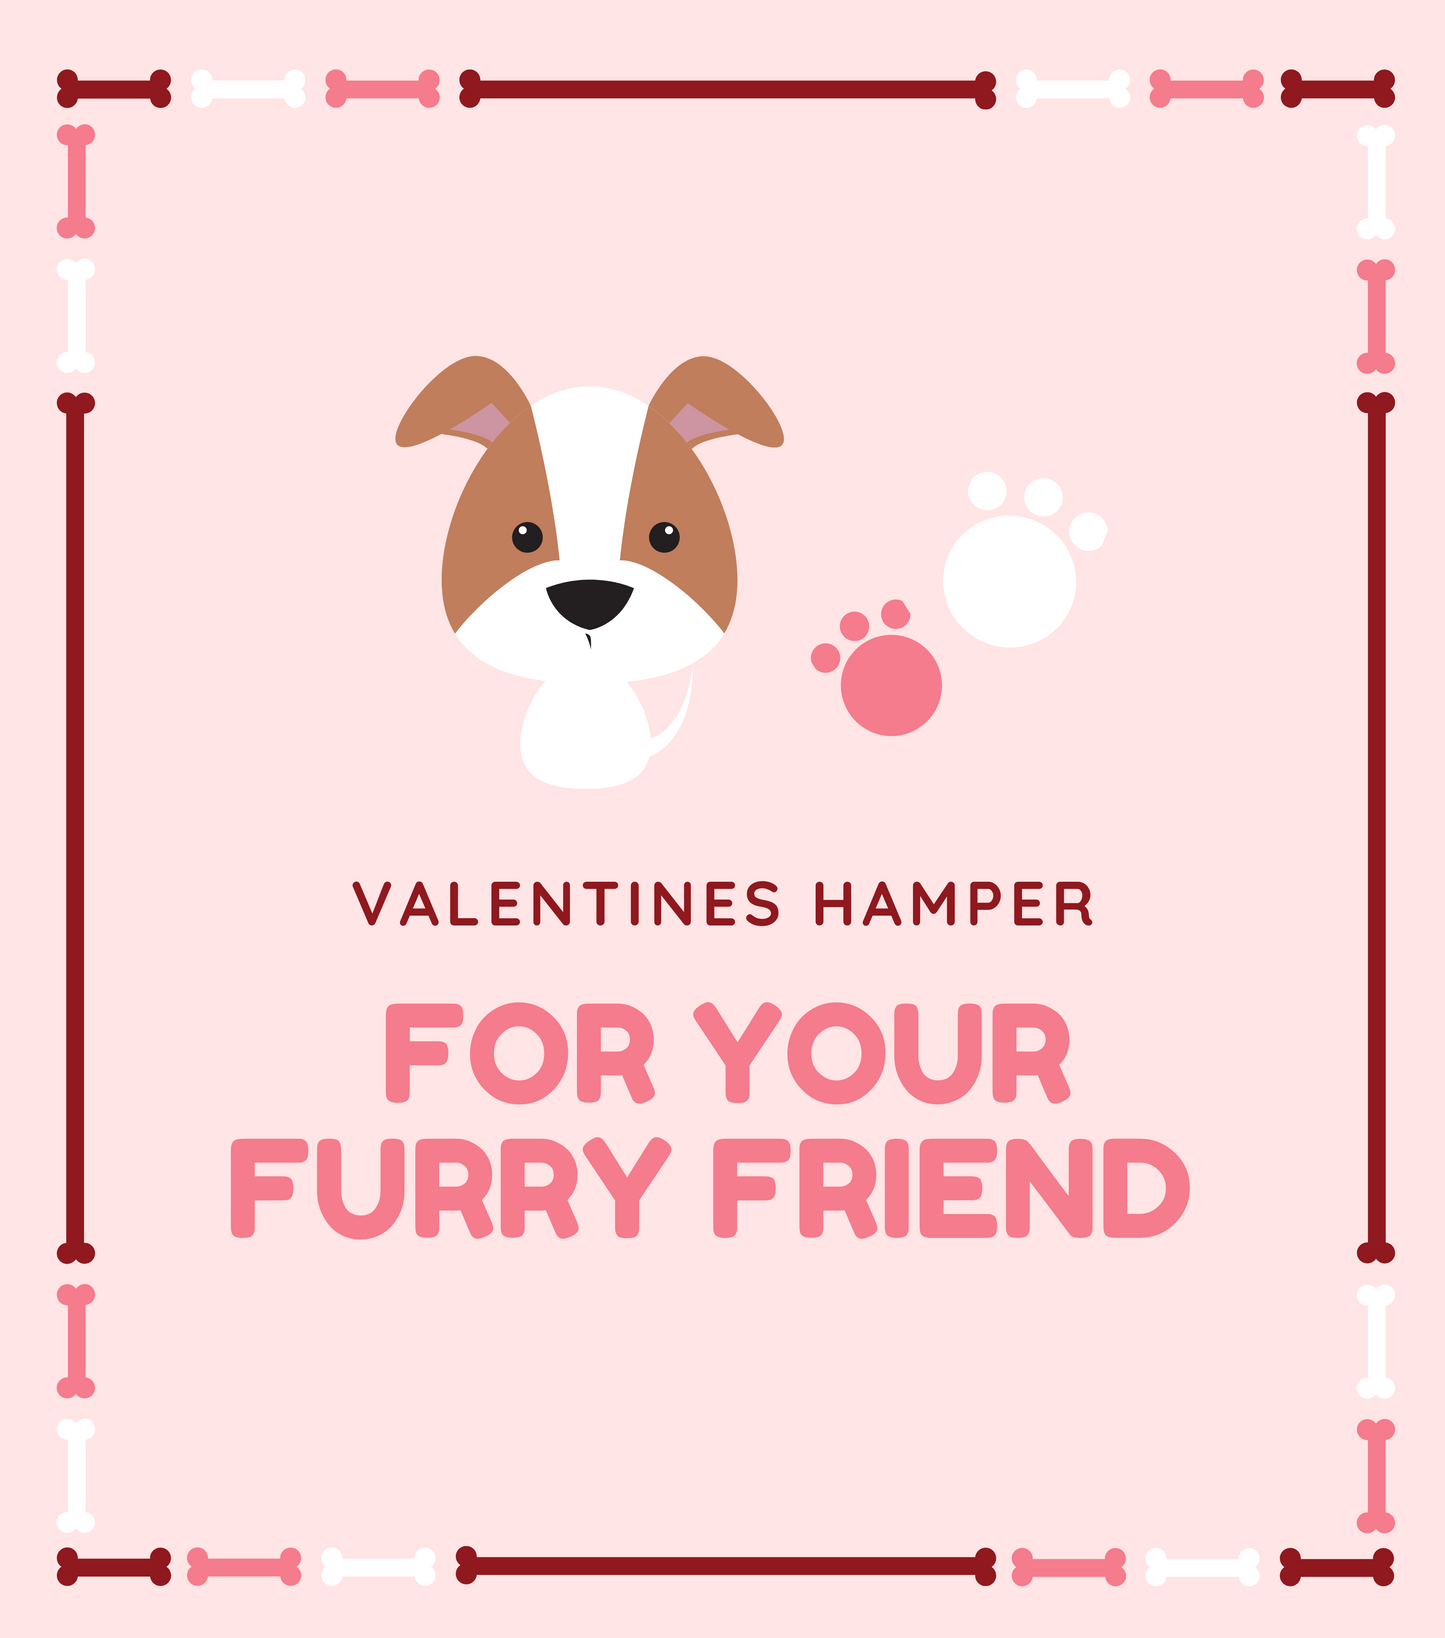 Valentines Day Hamper For your Furry Friend